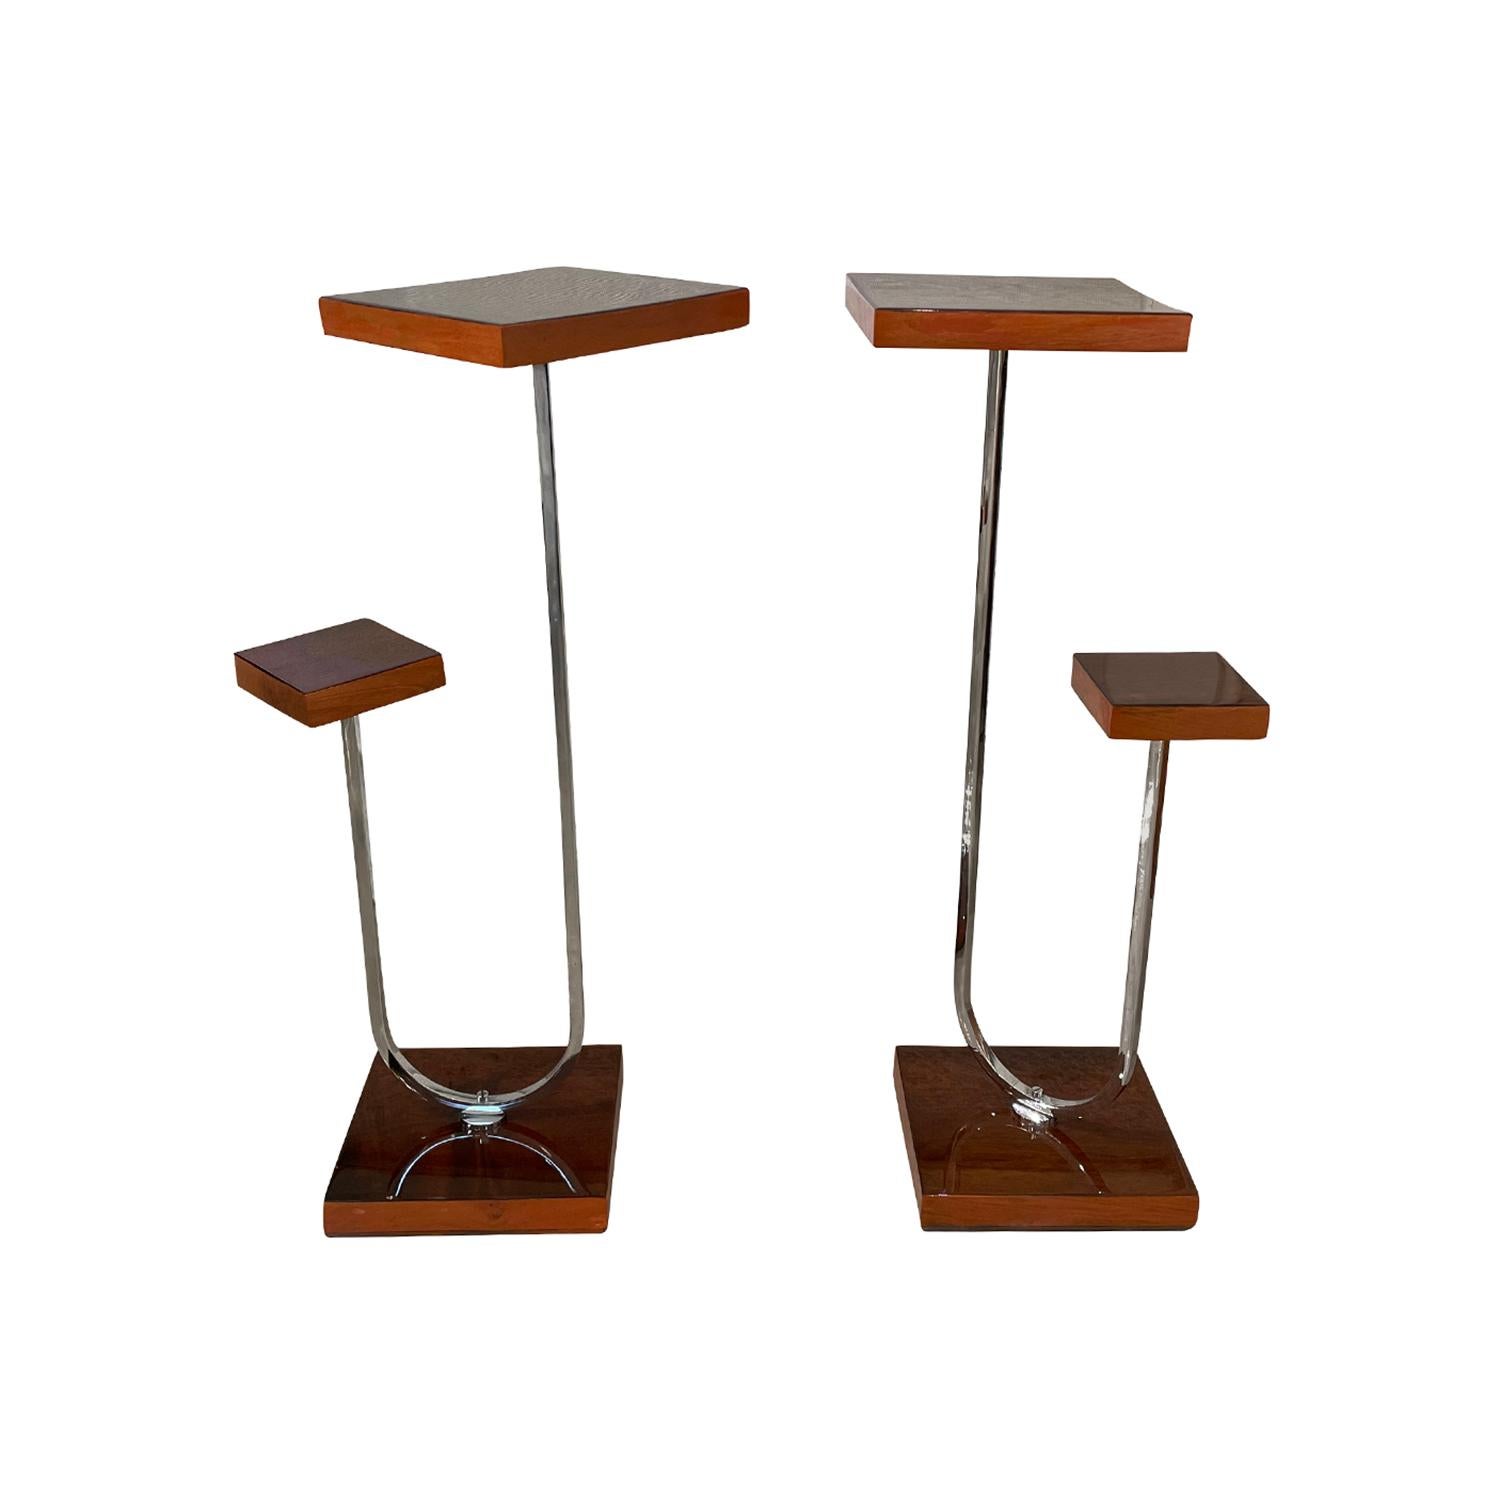 A small, vintage Art Deco Italian pair of pedestals, side tables made of hand crafted polished Mahogany, in good condition. Each of the tabletop square is supported by a curved chrome arm, supported by a wooden base. Wear consistent with age and